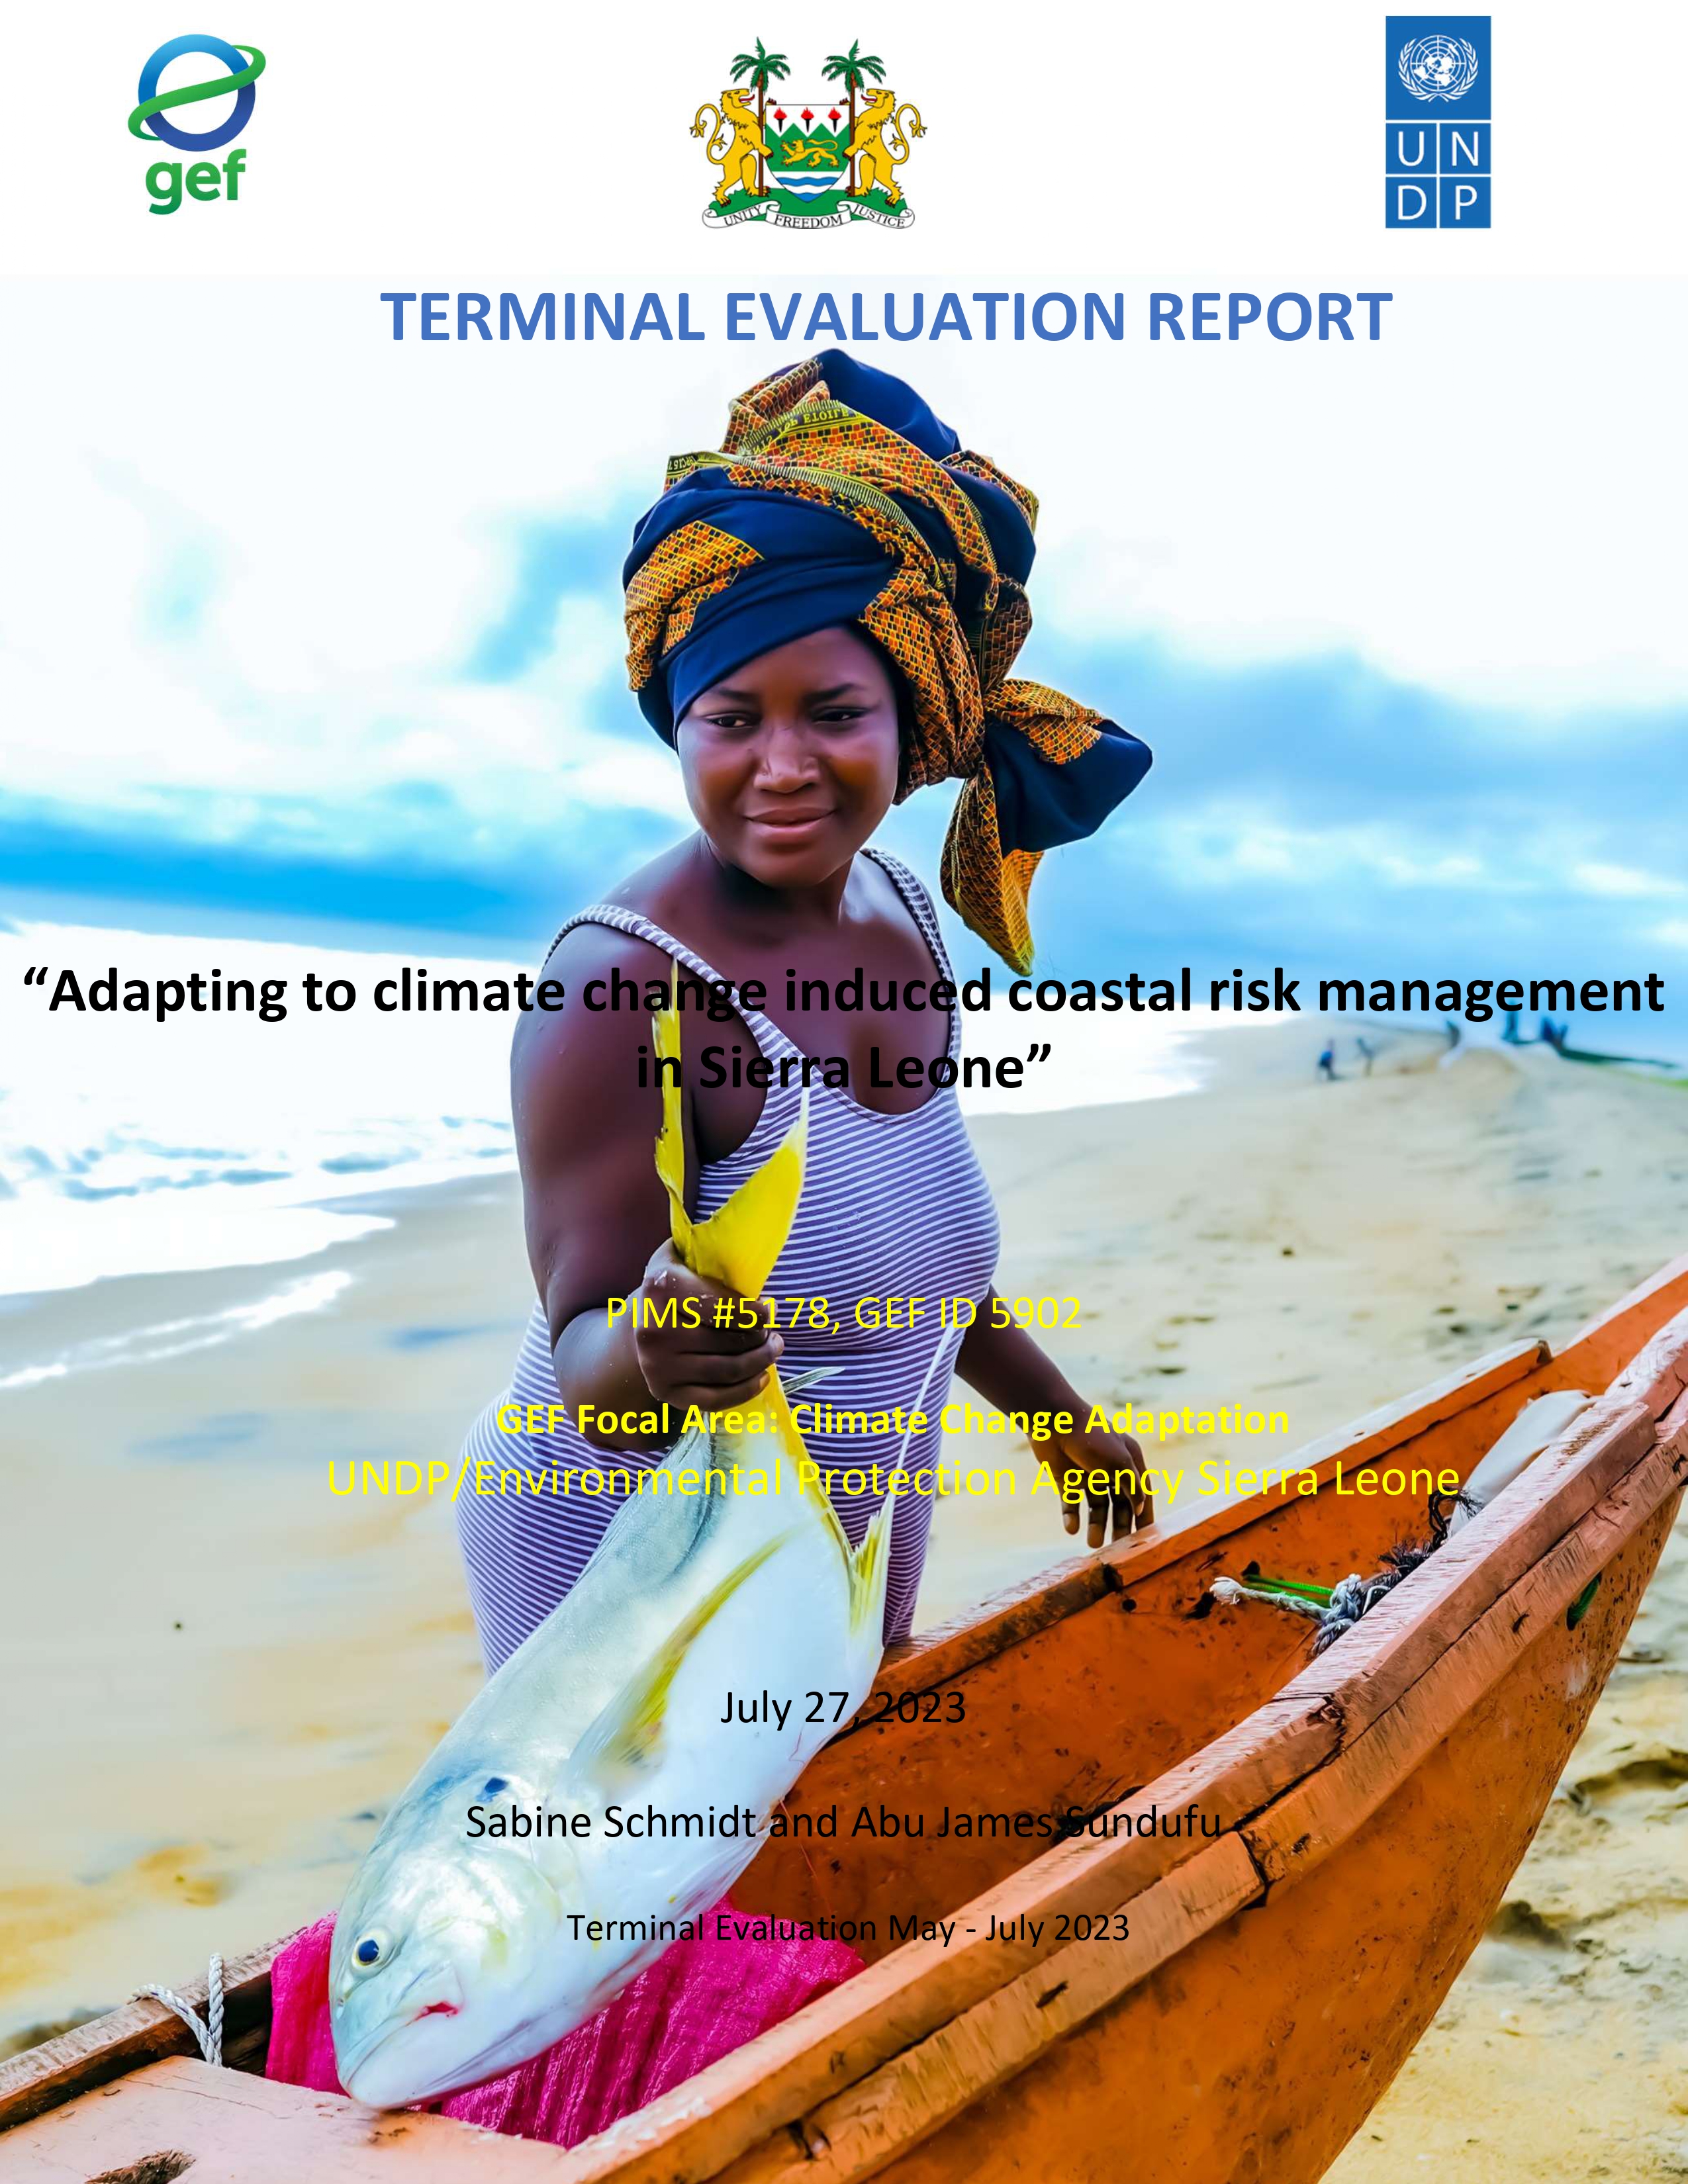 Terminal Evaluation of the Coastal Risks Management Project